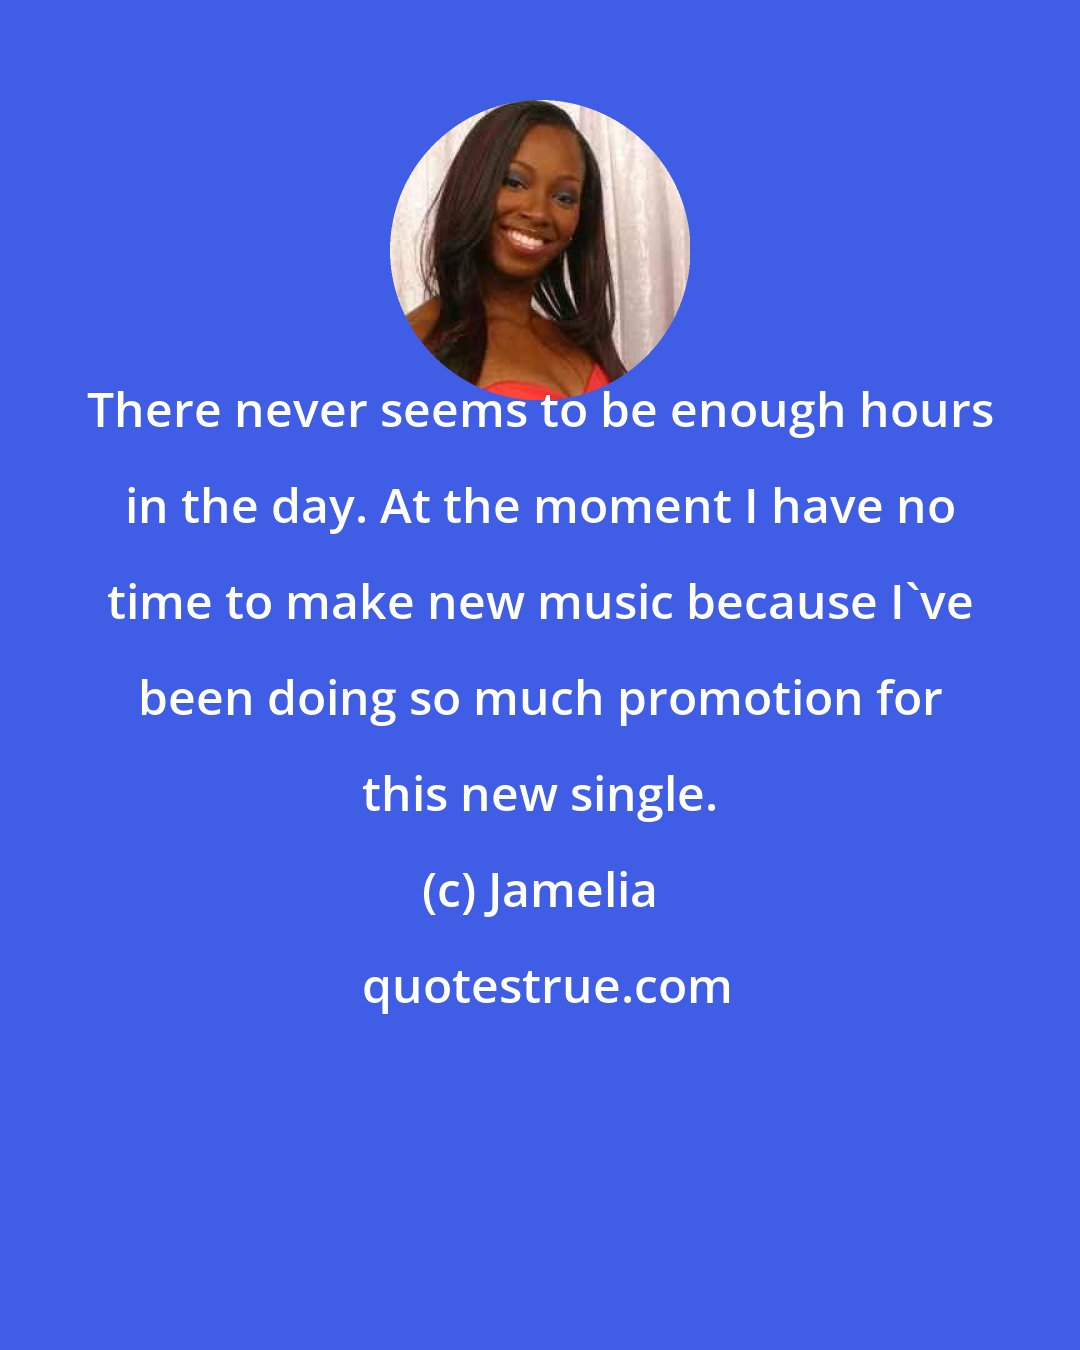 Jamelia: There never seems to be enough hours in the day. At the moment I have no time to make new music because I've been doing so much promotion for this new single.